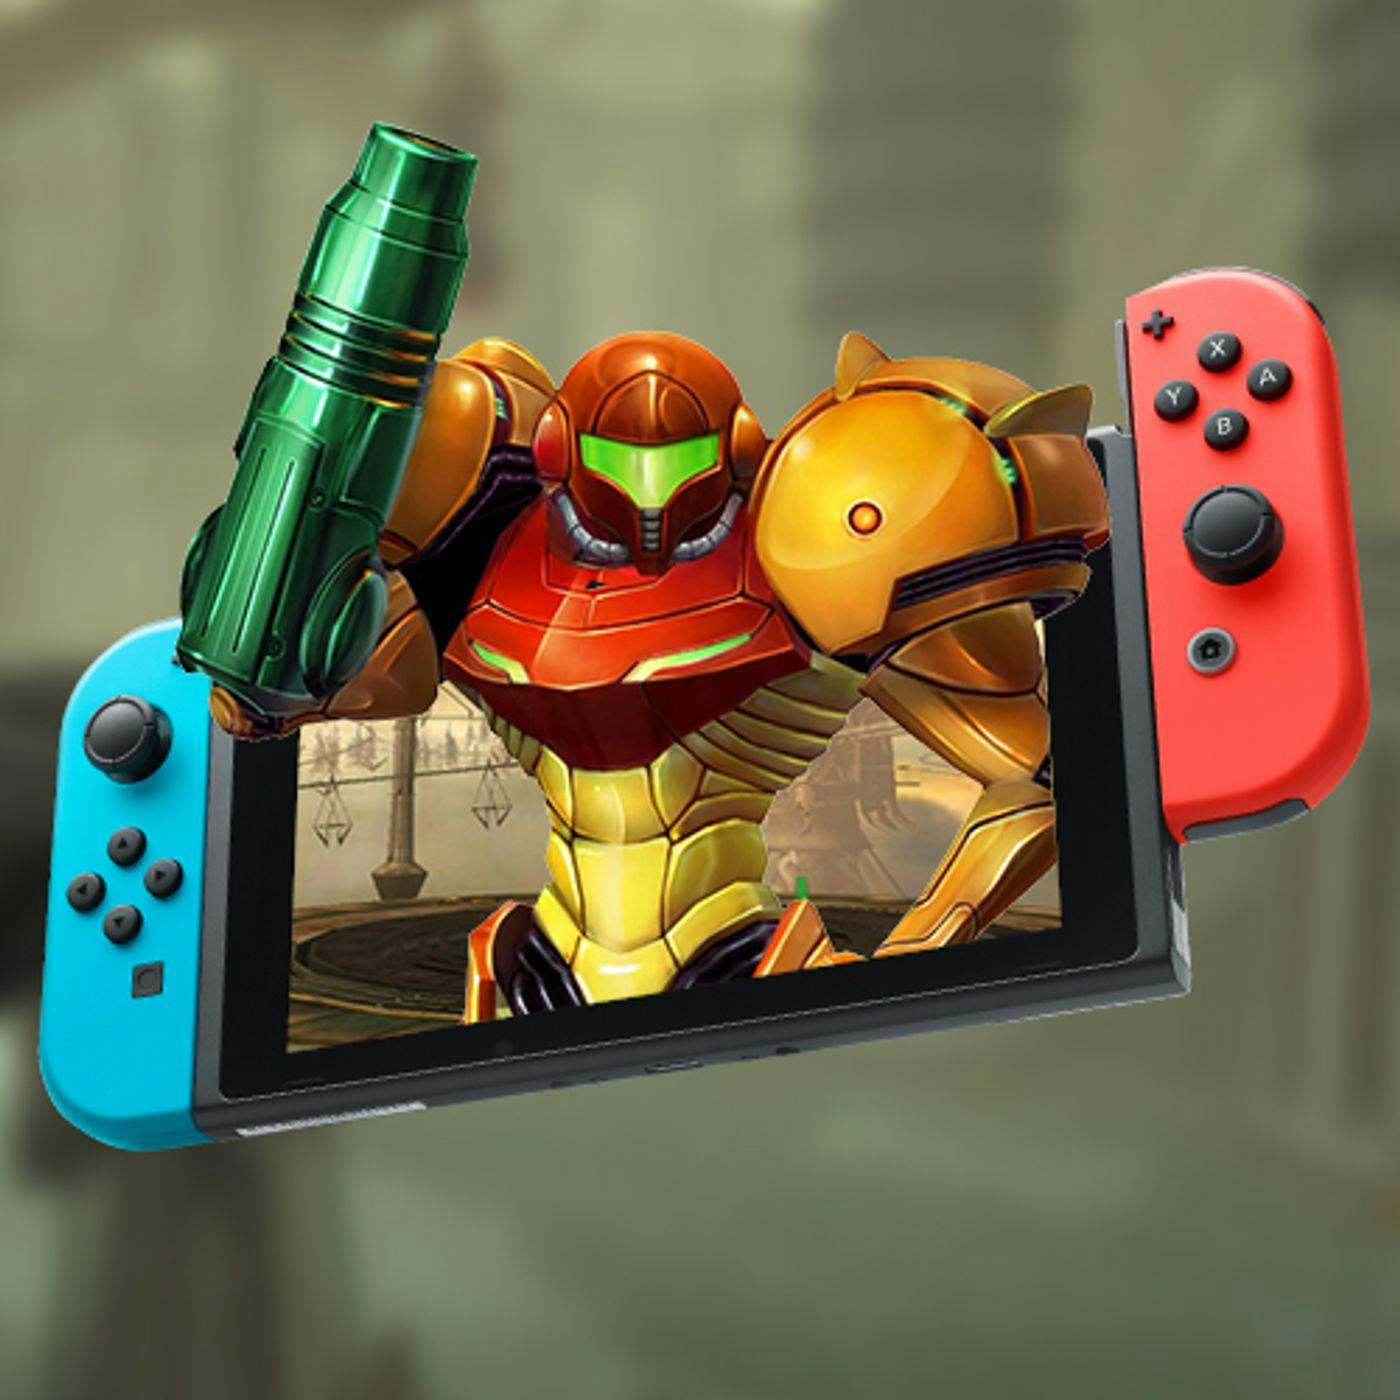 Is Bandai Namco Developing Metroid Prime 4 for Switch? - Nintendo Voice Chat Ep. 394